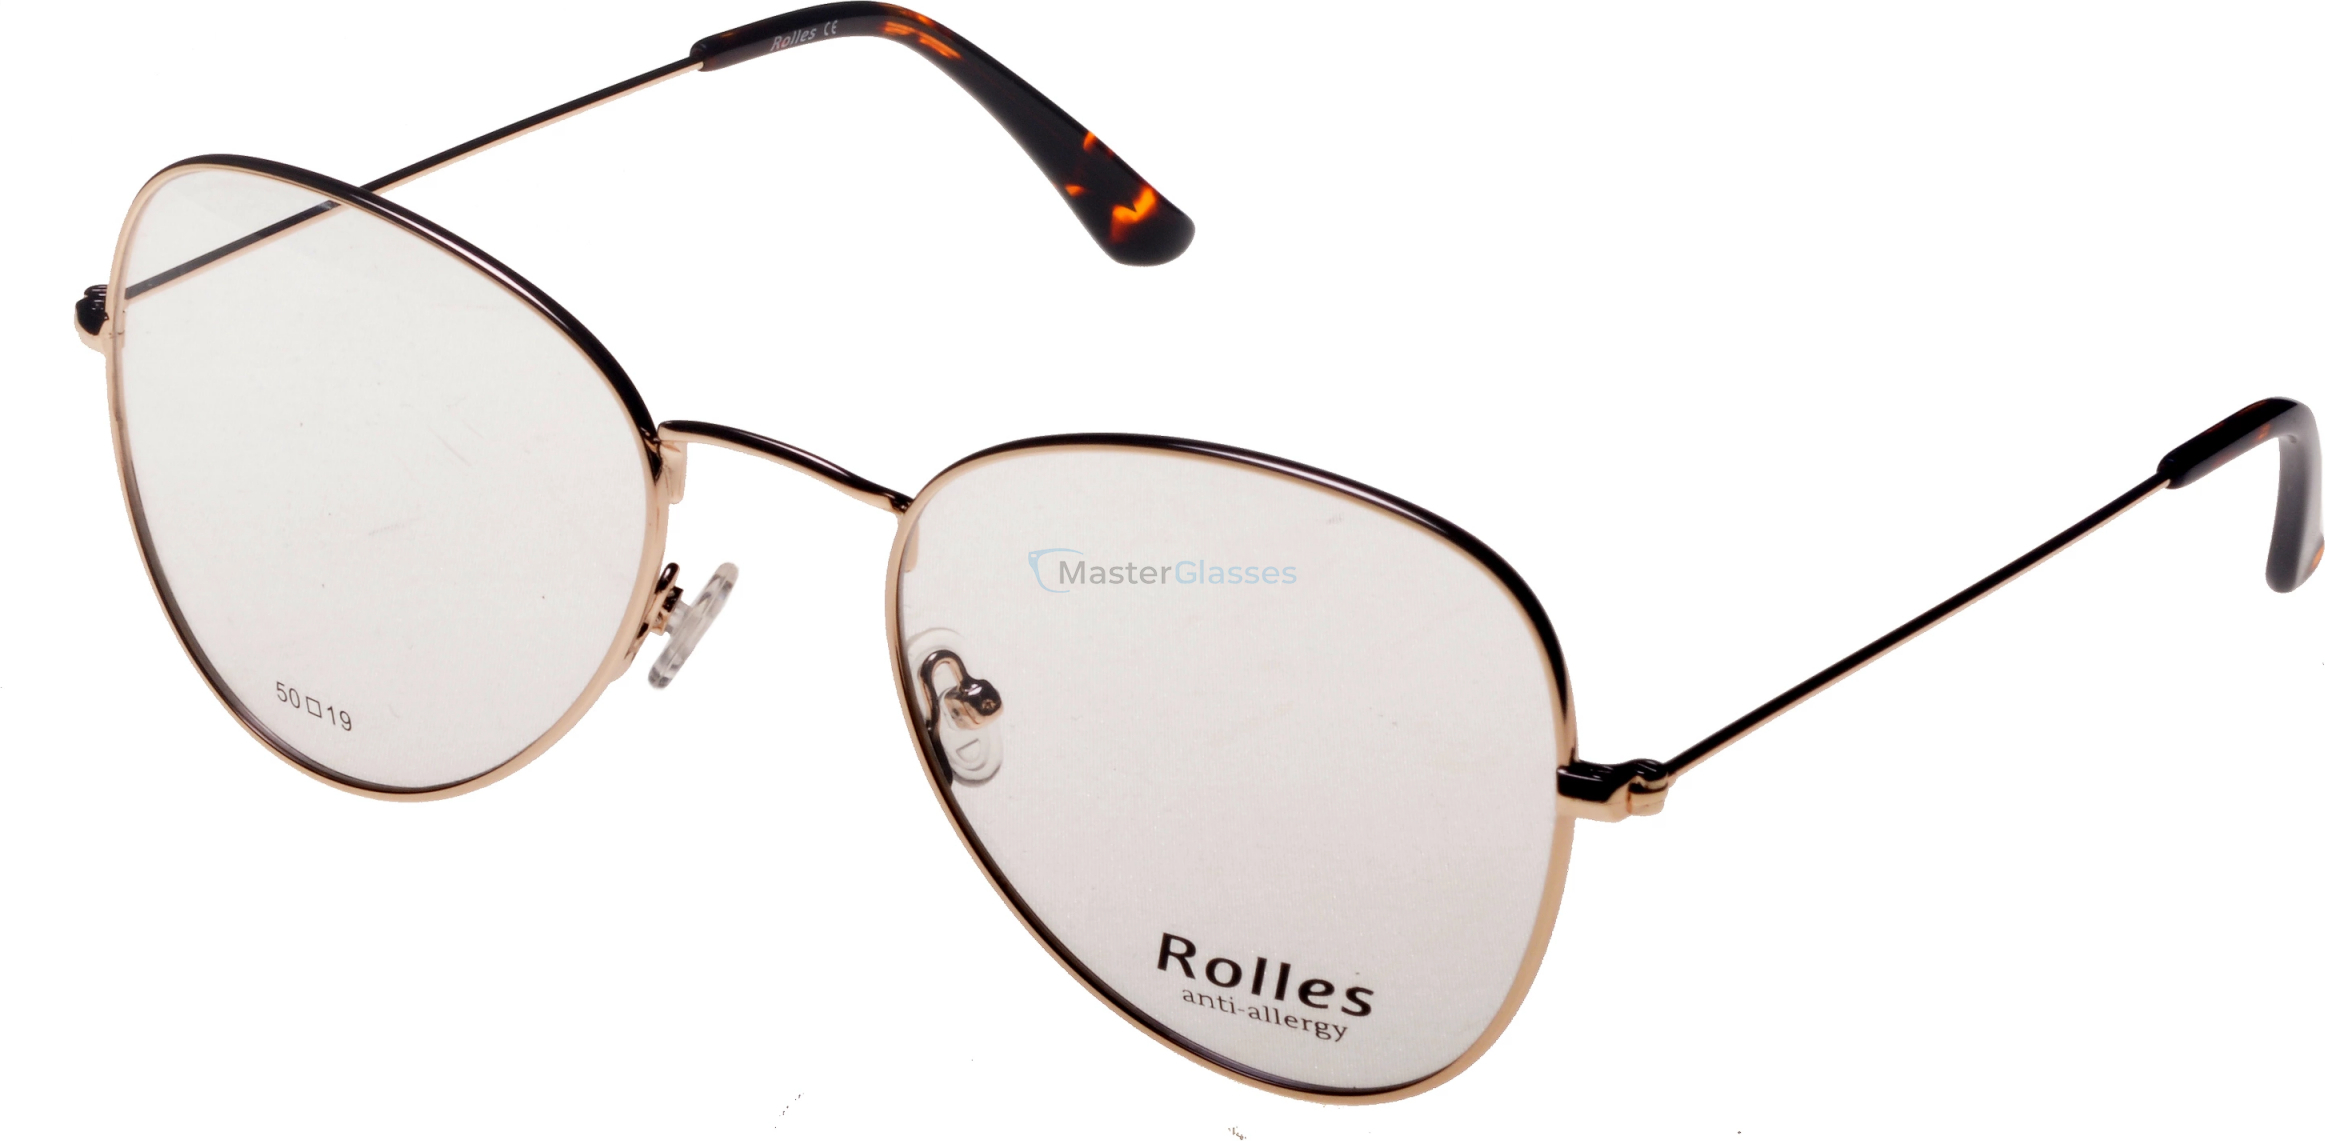  Rolles 690 01